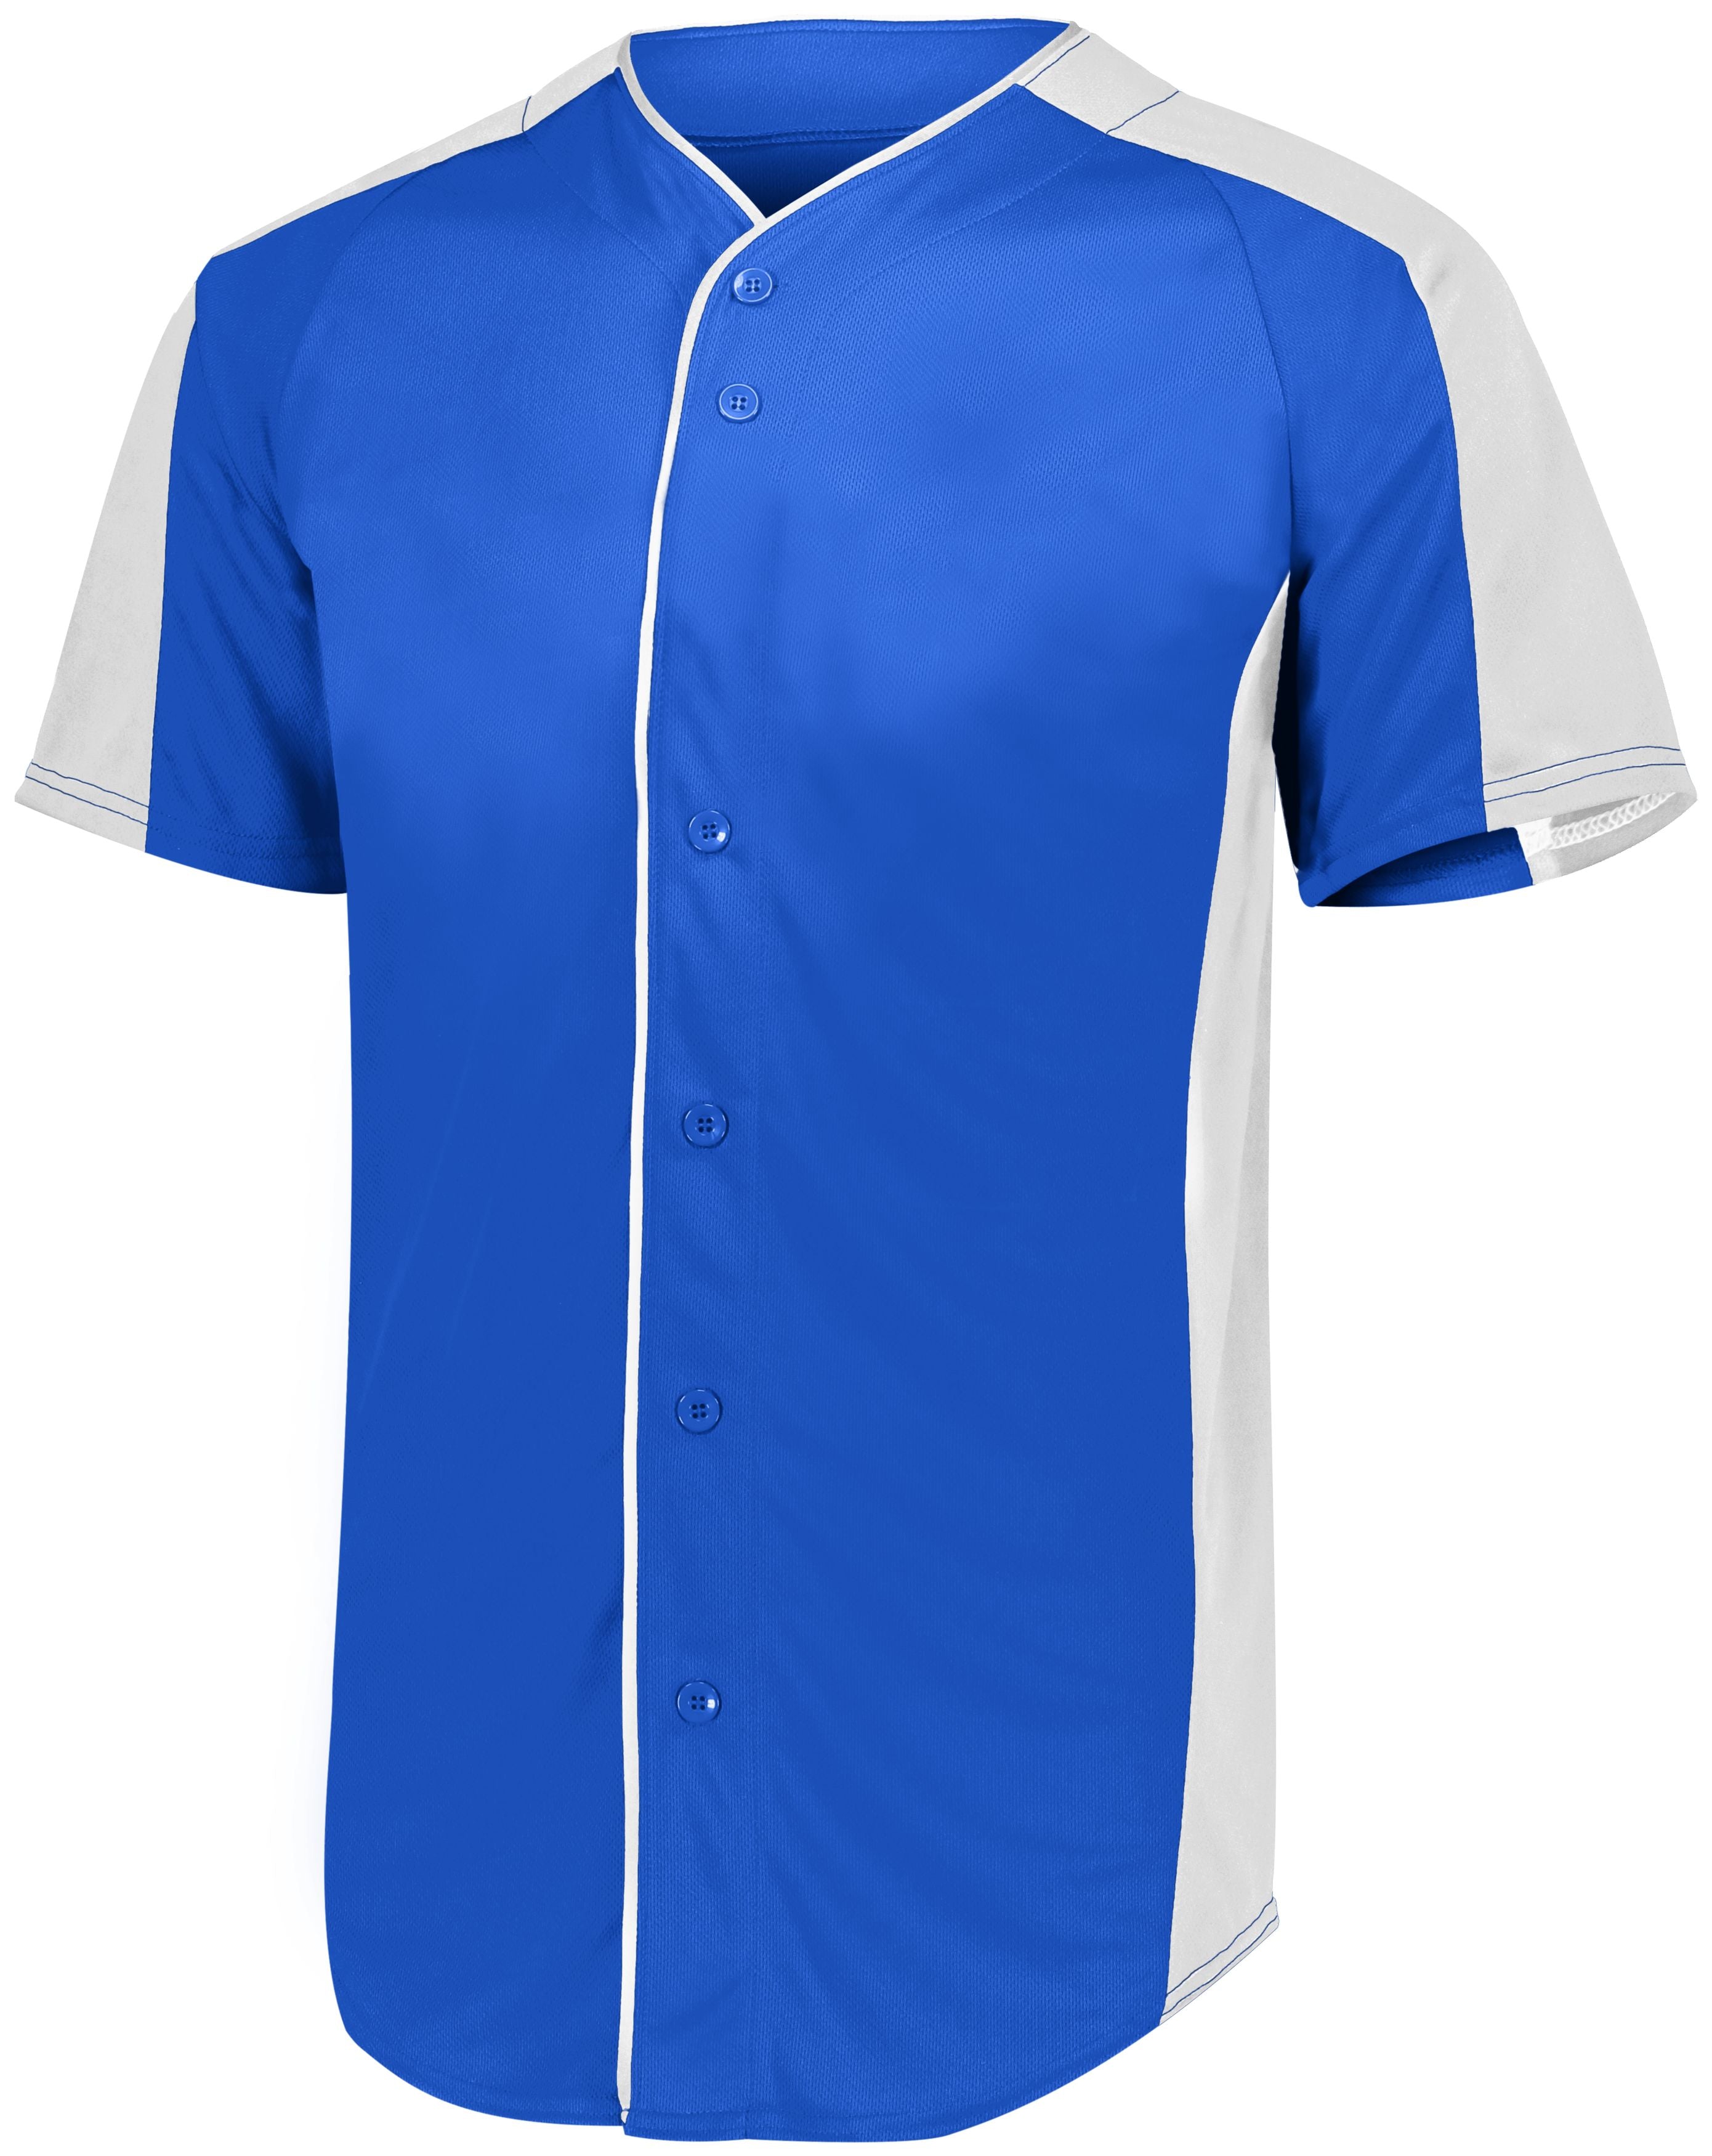 Augusta Sportswear Full-Button Baseball Jersey in Royal/White  -Part of the Adult, Adult-Jersey, Augusta-Products, Baseball, Shirts, All-Sports, All-Sports-1 product lines at KanaleyCreations.com